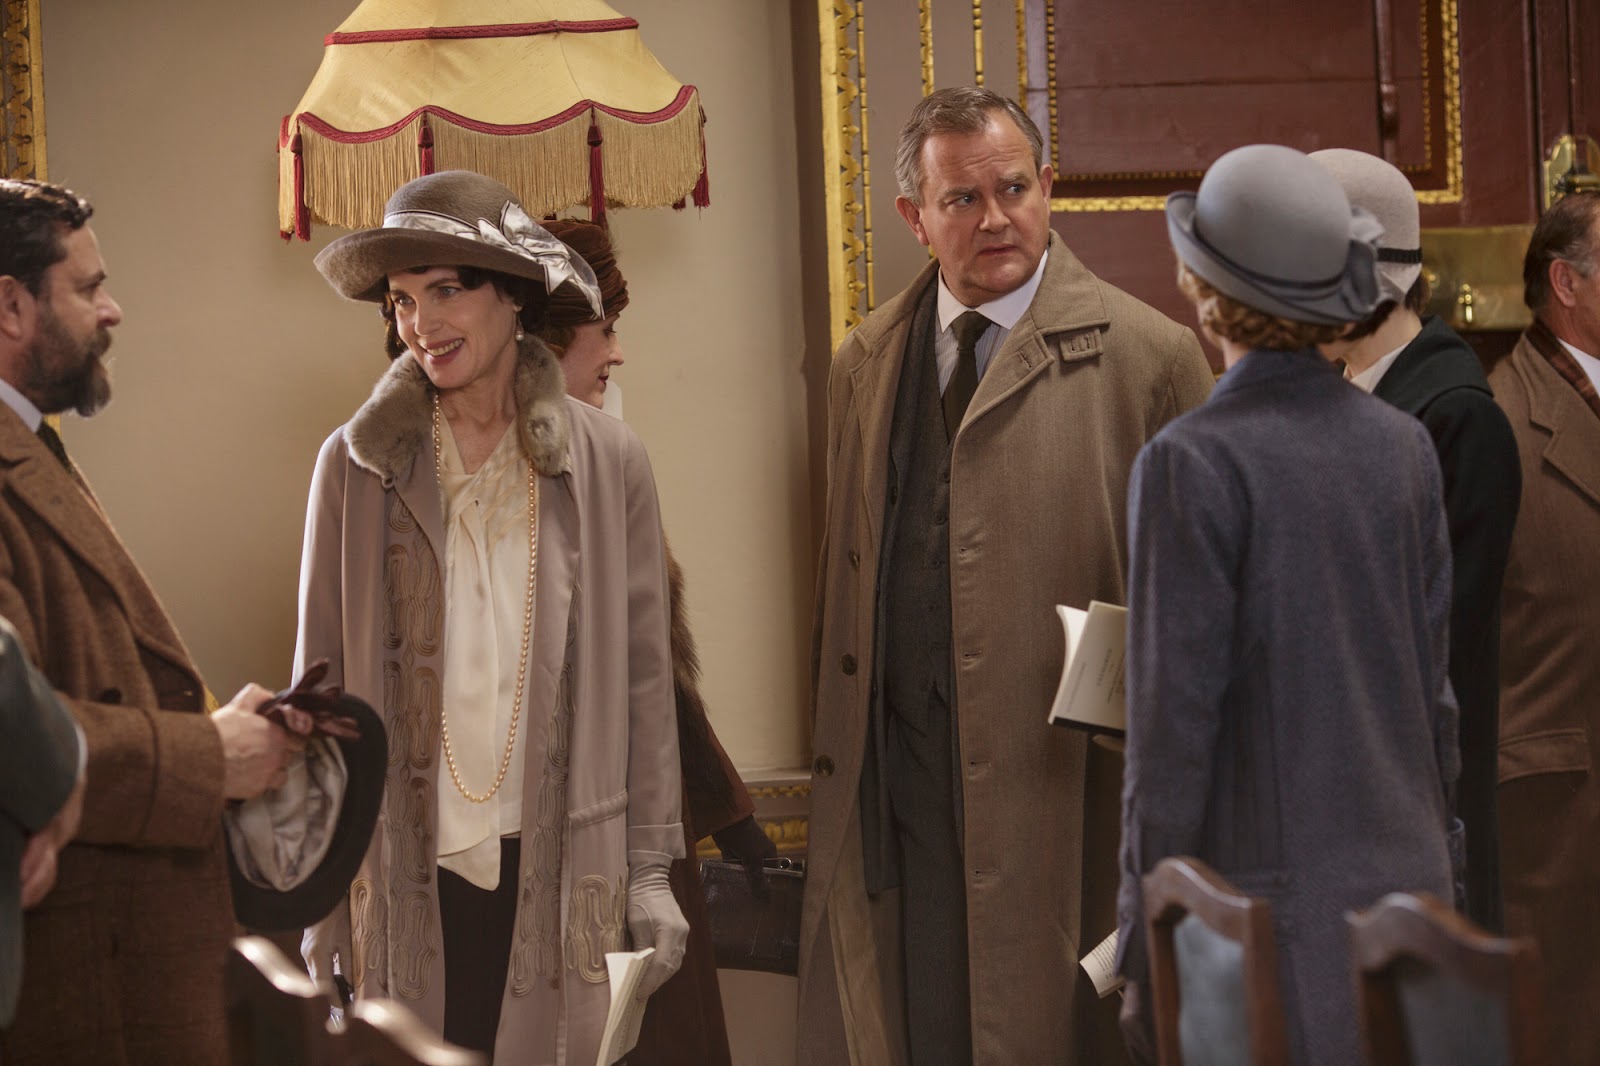 DOWNTON ABBEY Season 6 Trailers and Pictures | The Entertainment Factor